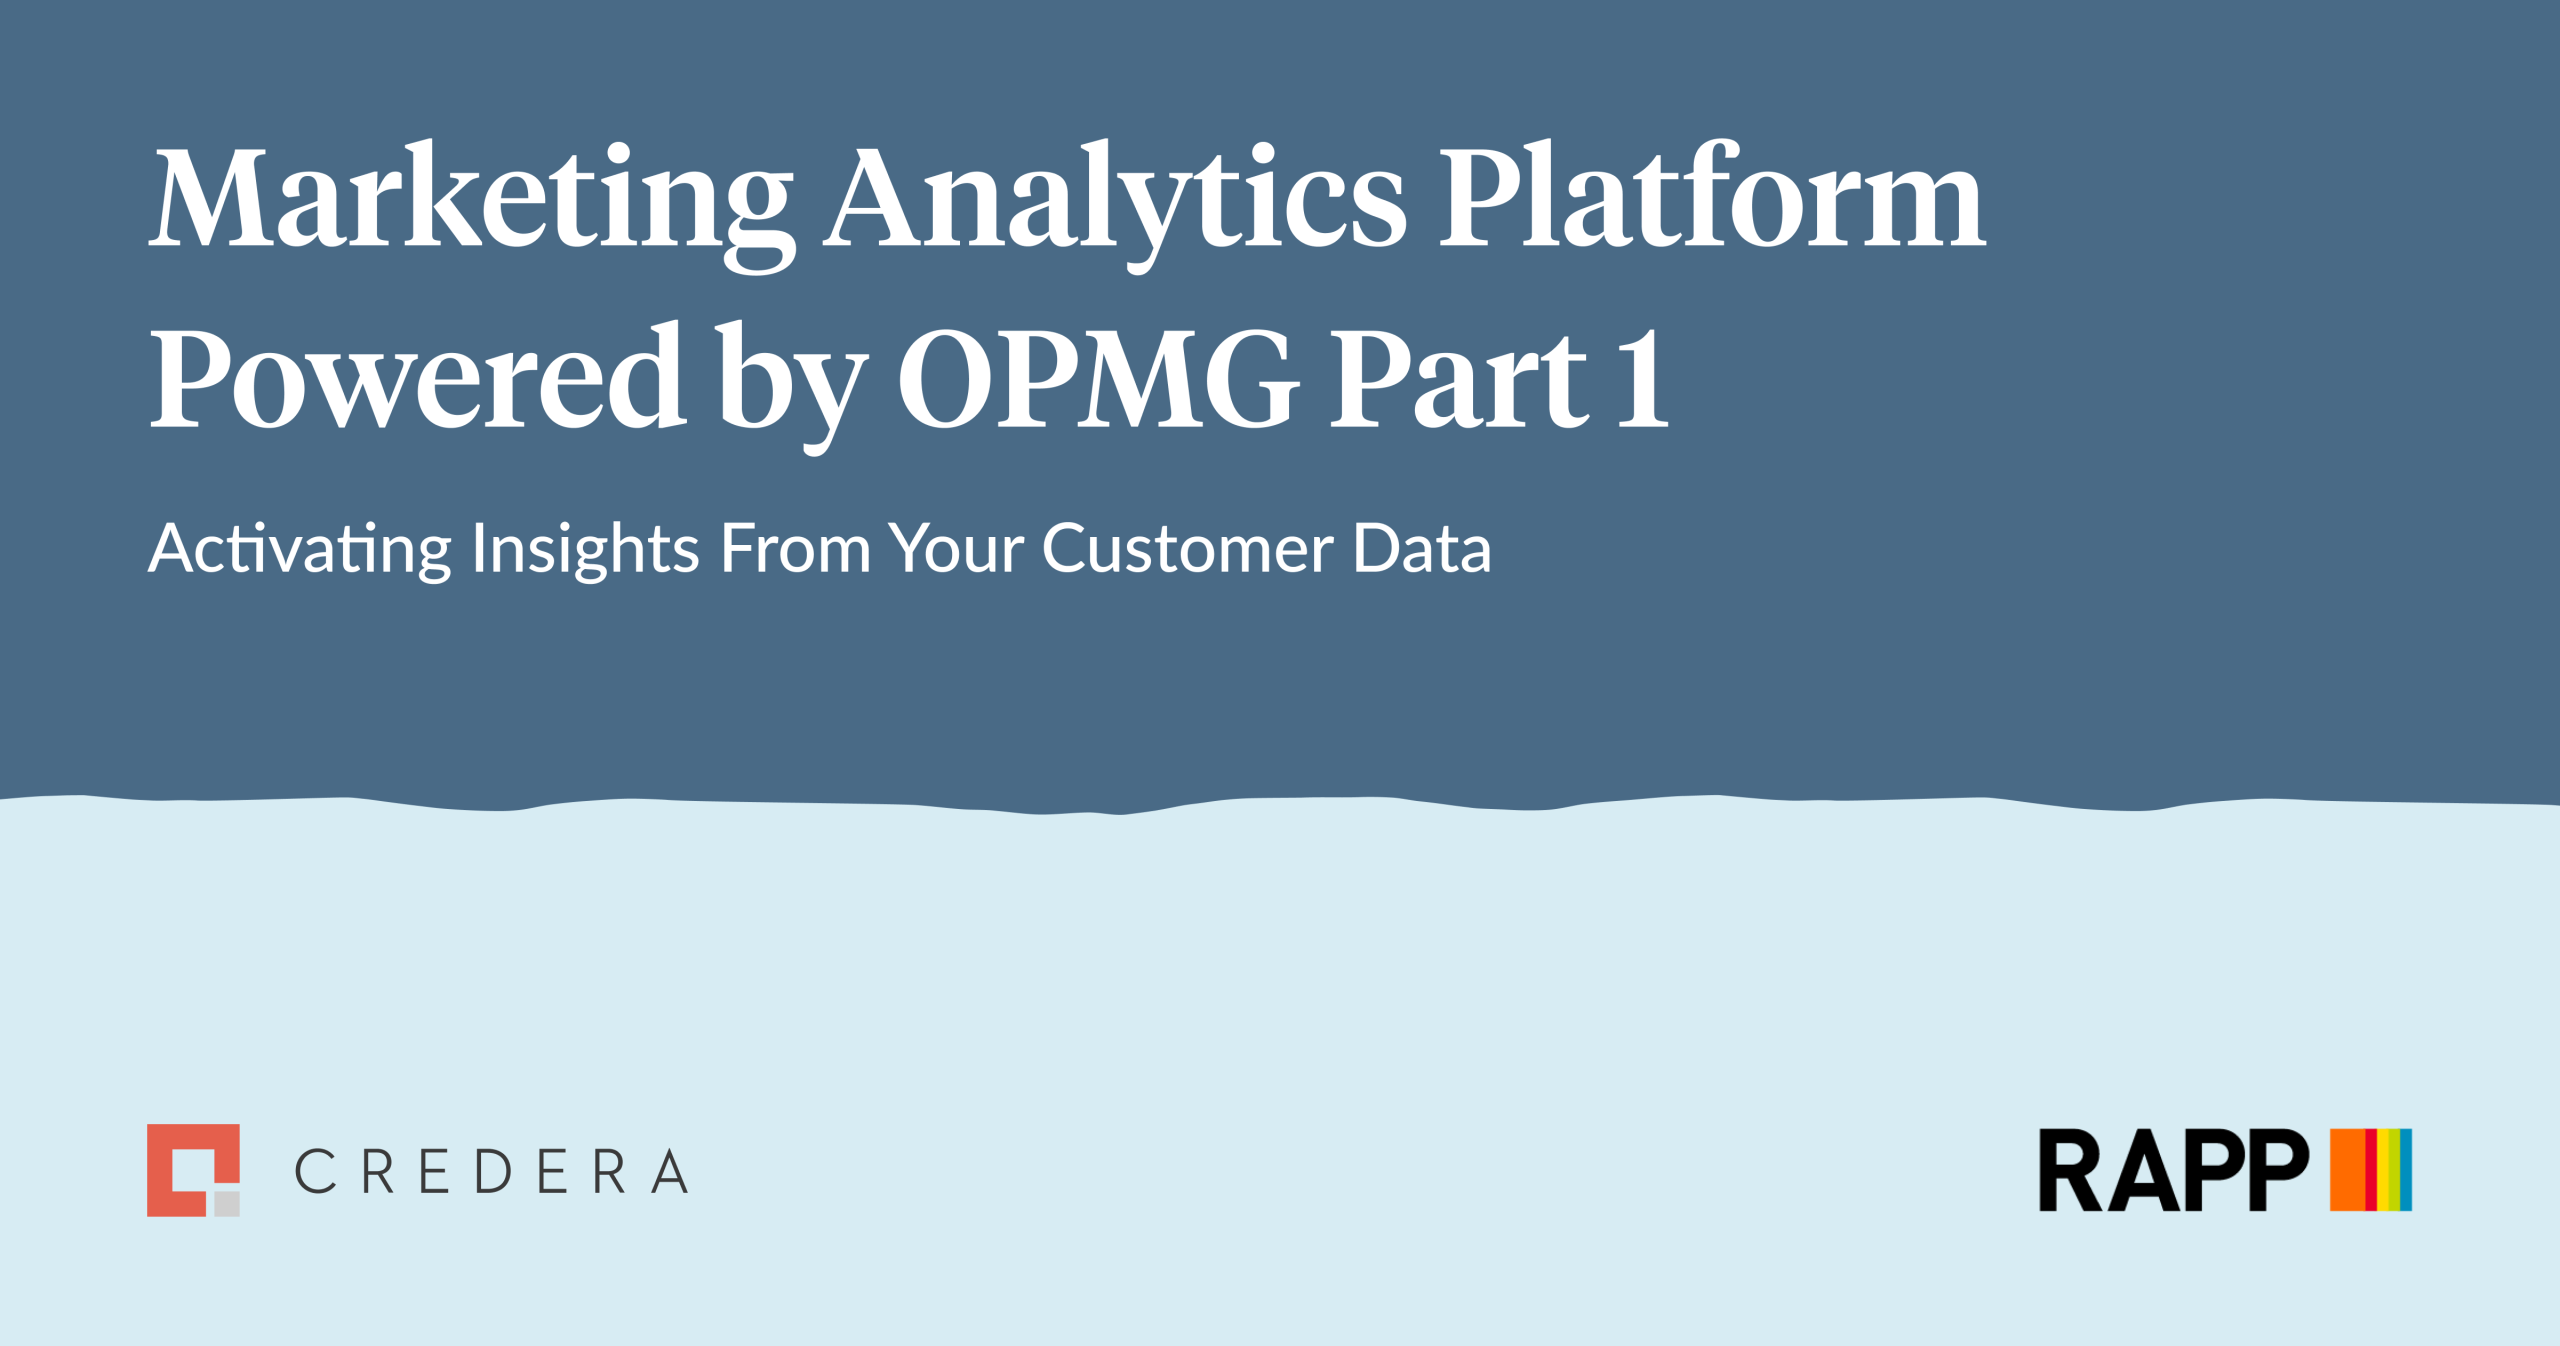 Marketing Analytics Platform Powered by OPMG Part 1: Activating Insights From Your Customer Data